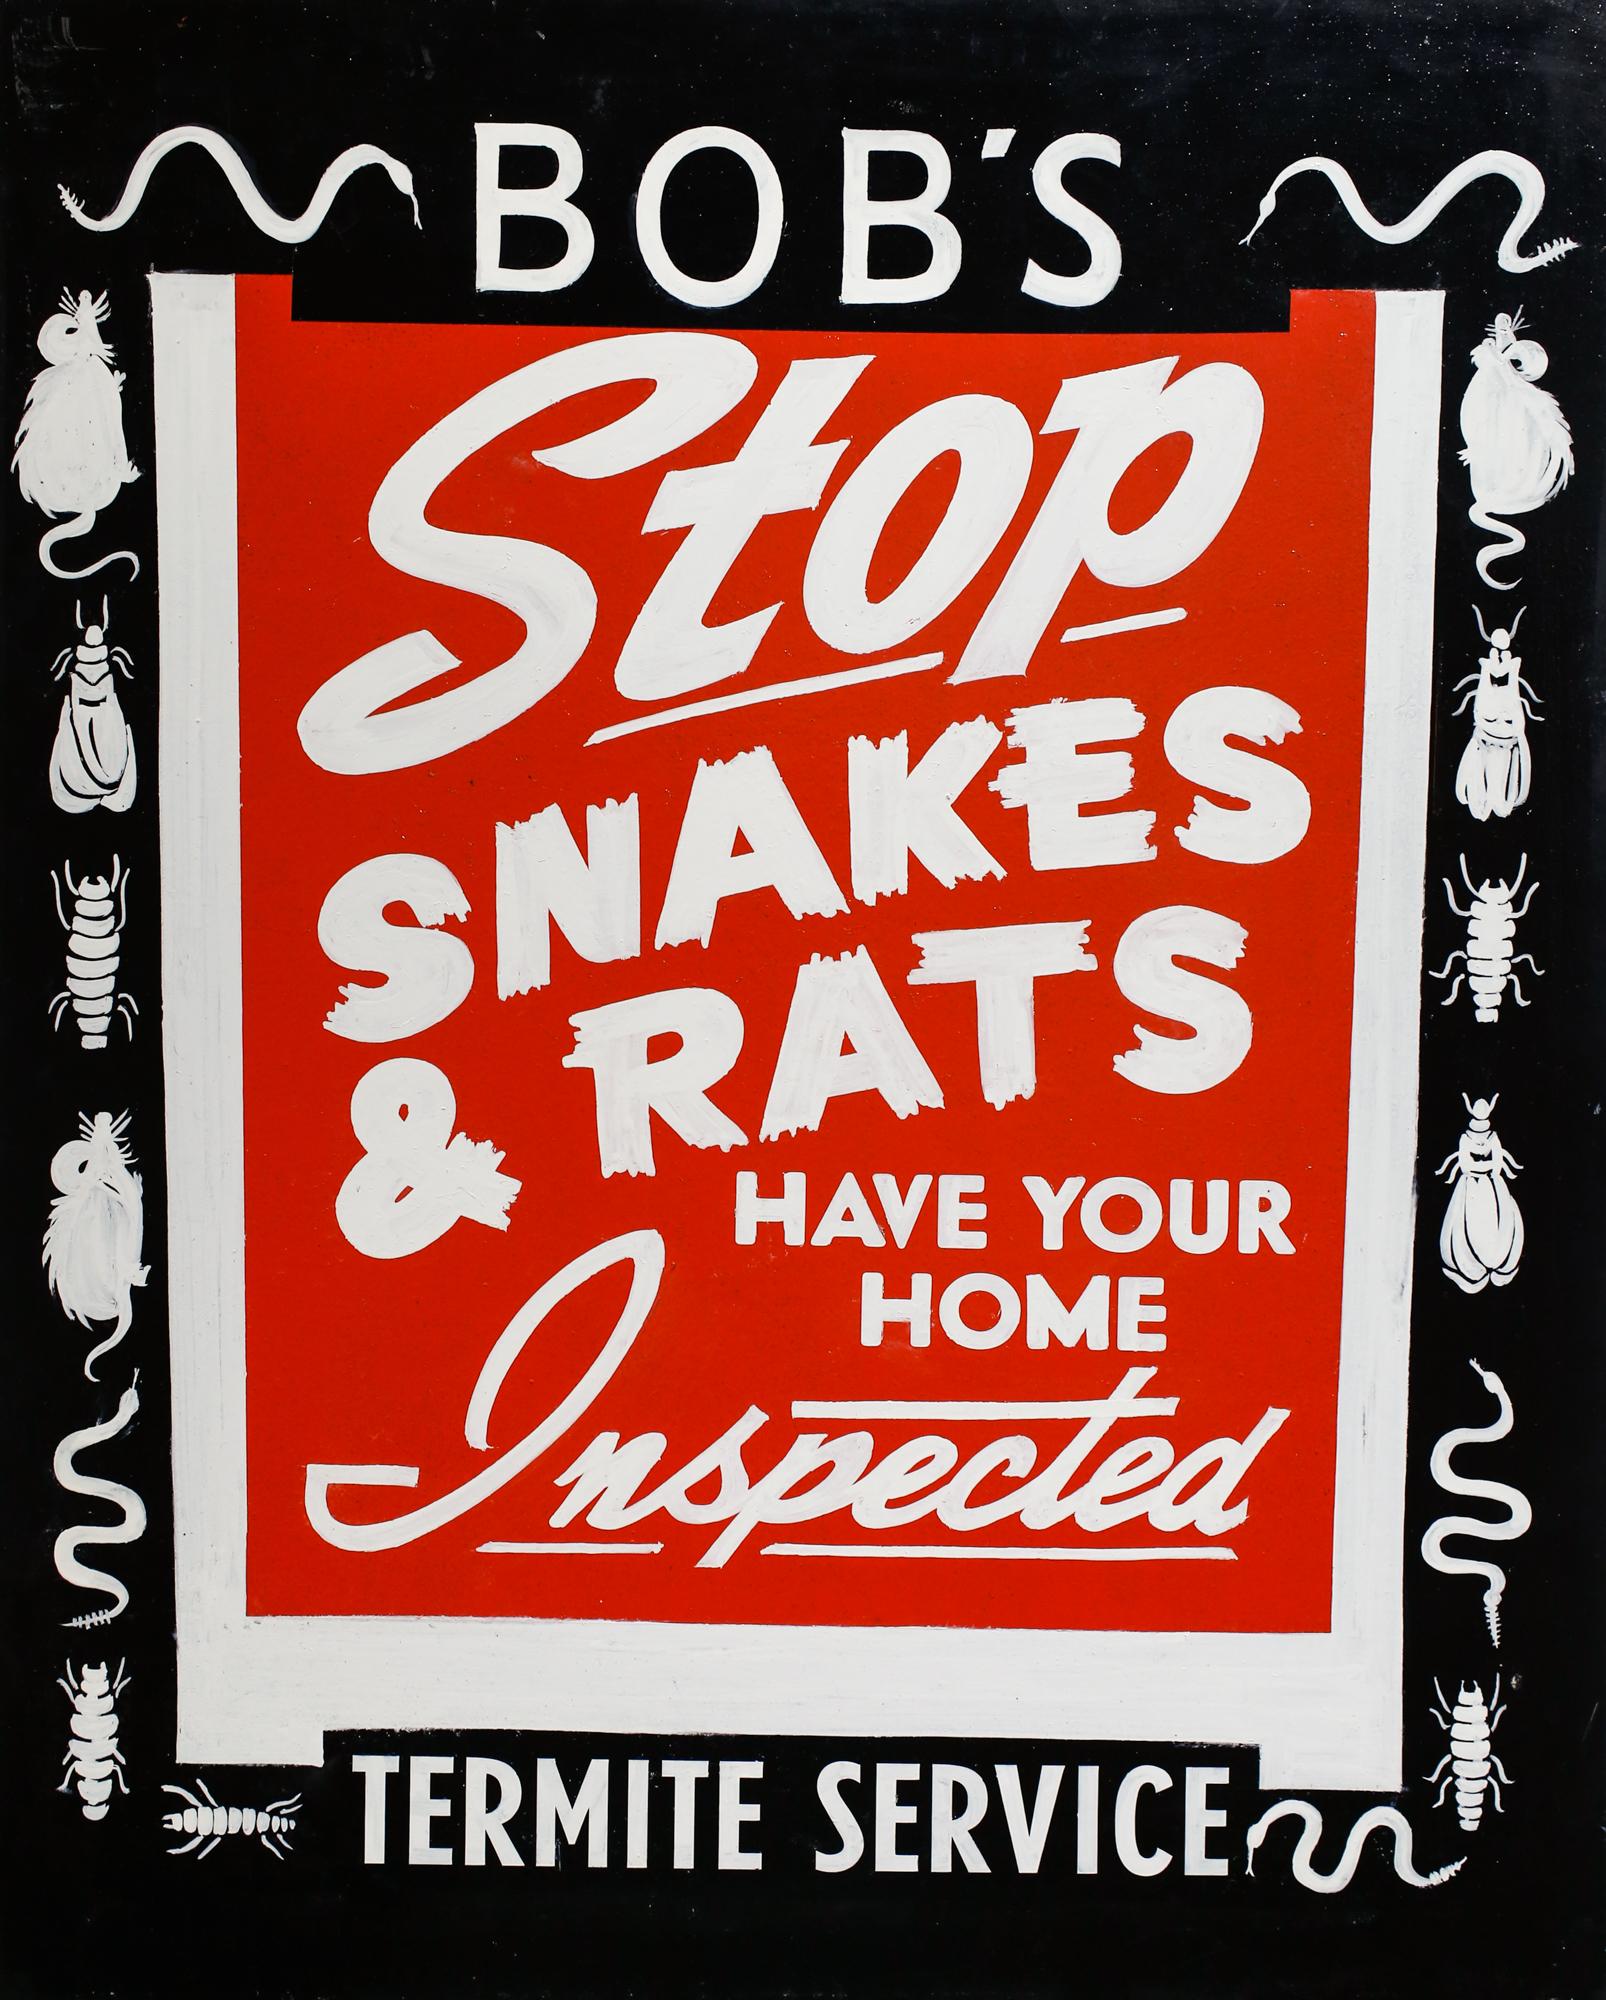 Marissa Cianciulli Still-Life Painting - "Bob's Termite Service", Hand-Painted Sign, Typography, Text, Blue, Red White